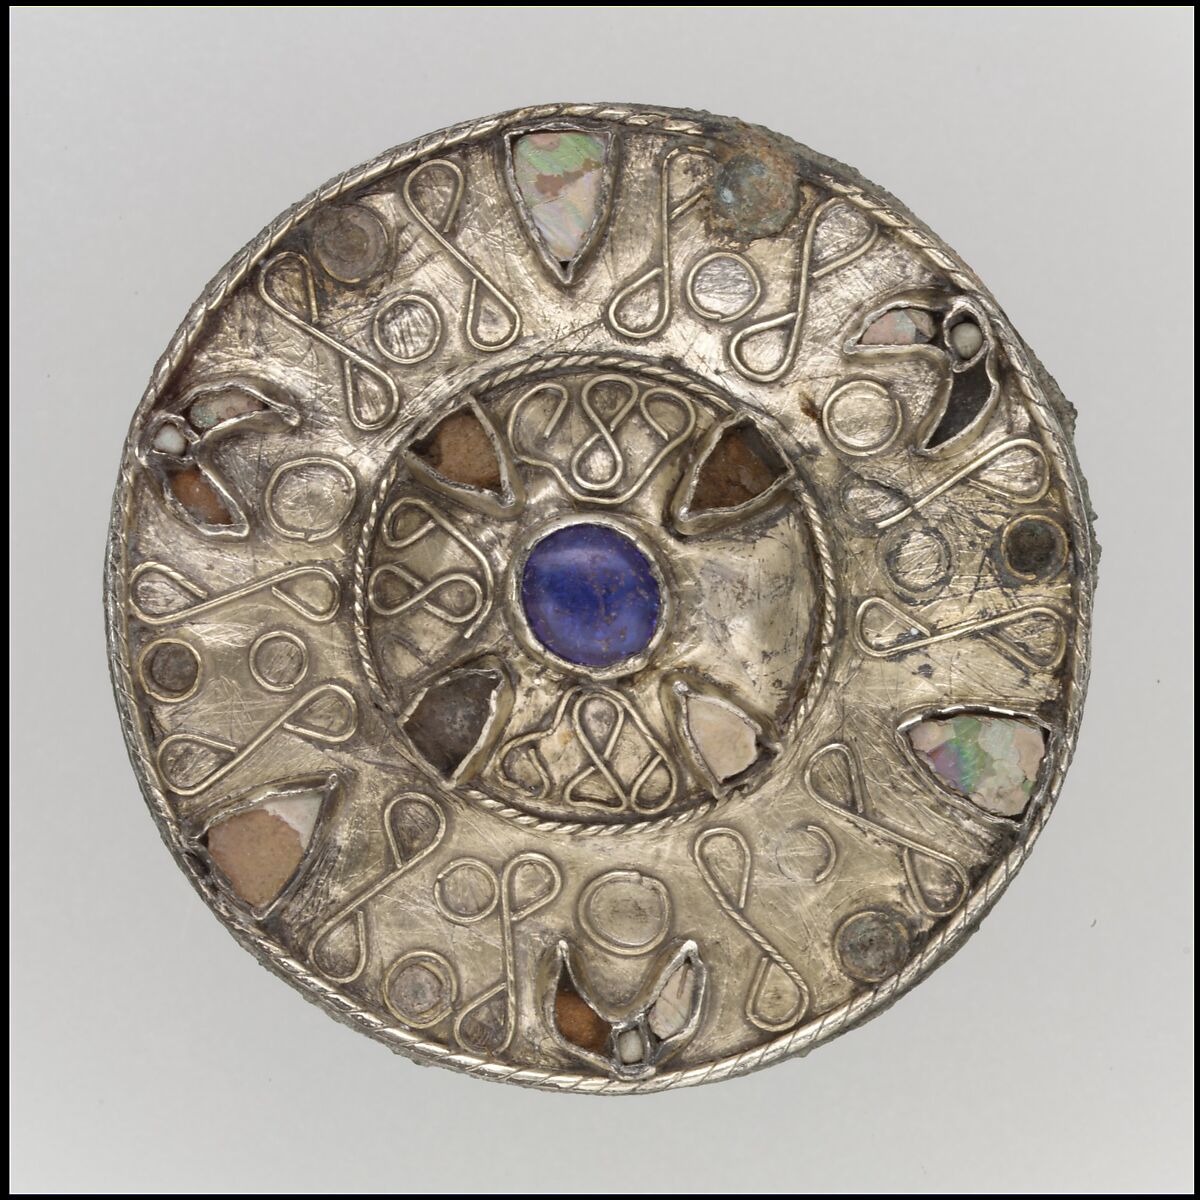 Disk Brooch, Silver-gilt, glass, pearl, Gilded silver with filigree and glass inlays, Frankish 